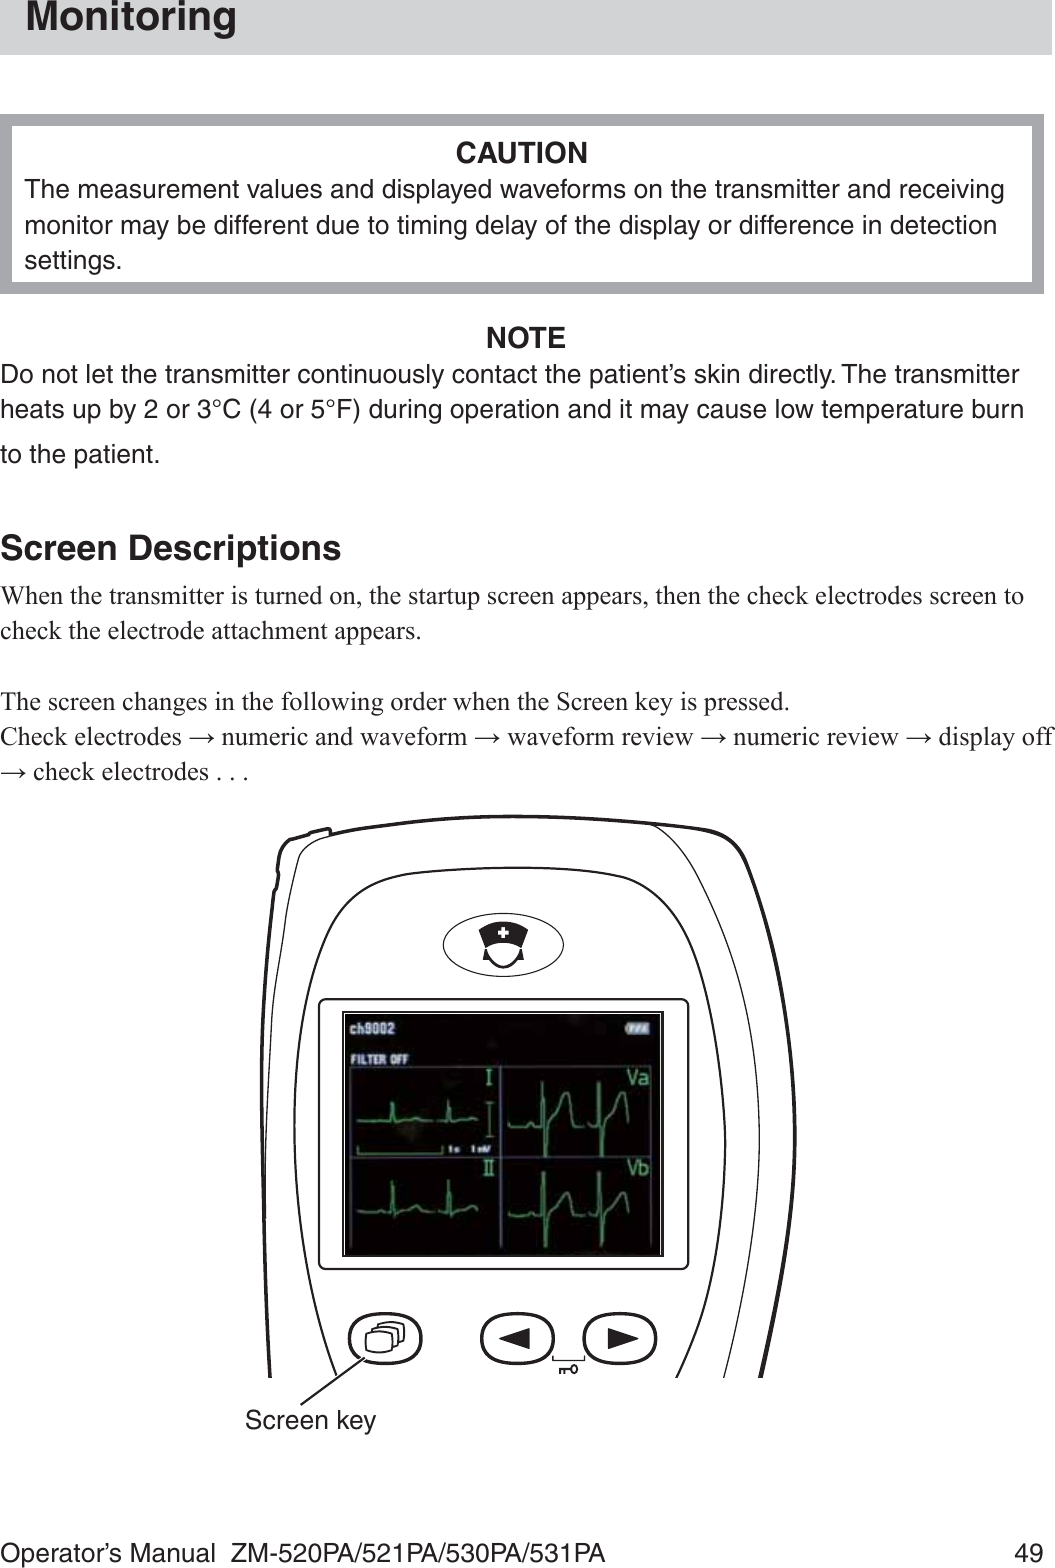 Operator’s Manual  ZM-520PA/521PA/530PA/531PA  49MonitoringCAUTIONThe measurement values and displayed waveforms on the transmitter and receiving monitor may be different due to timing delay of the display or difference in detection settings.NOTEDo not let the transmitter continuously contact the patient’s skin directly. The transmitter heats up by 2 or 3°C (4 or 5°F) during operation and it may cause low temperature burn to the patient.Screen Descriptions:KHQWKHWUDQVPLWWHULVWXUQHGRQWKHVWDUWXSVFUHHQDSSHDUVWKHQWKHFKHFNHOHFWURGHVVFUHHQWRFKHFNWKHHOHFWURGHDWWDFKPHQWDSSHDUV7KHVFUHHQFKDQJHVLQWKHIROORZLQJRUGHUZKHQWKH6FUHHQNH\LVSUHVVHG&amp;KHFNHOHFWURGHVĺQXPHULFDQGZDYHIRUPĺZDYHIRUPUHYLHZĺQXPHULFUHYLHZĺGLVSOD\RIIĺFKHFNHOHFWURGHVScreen key